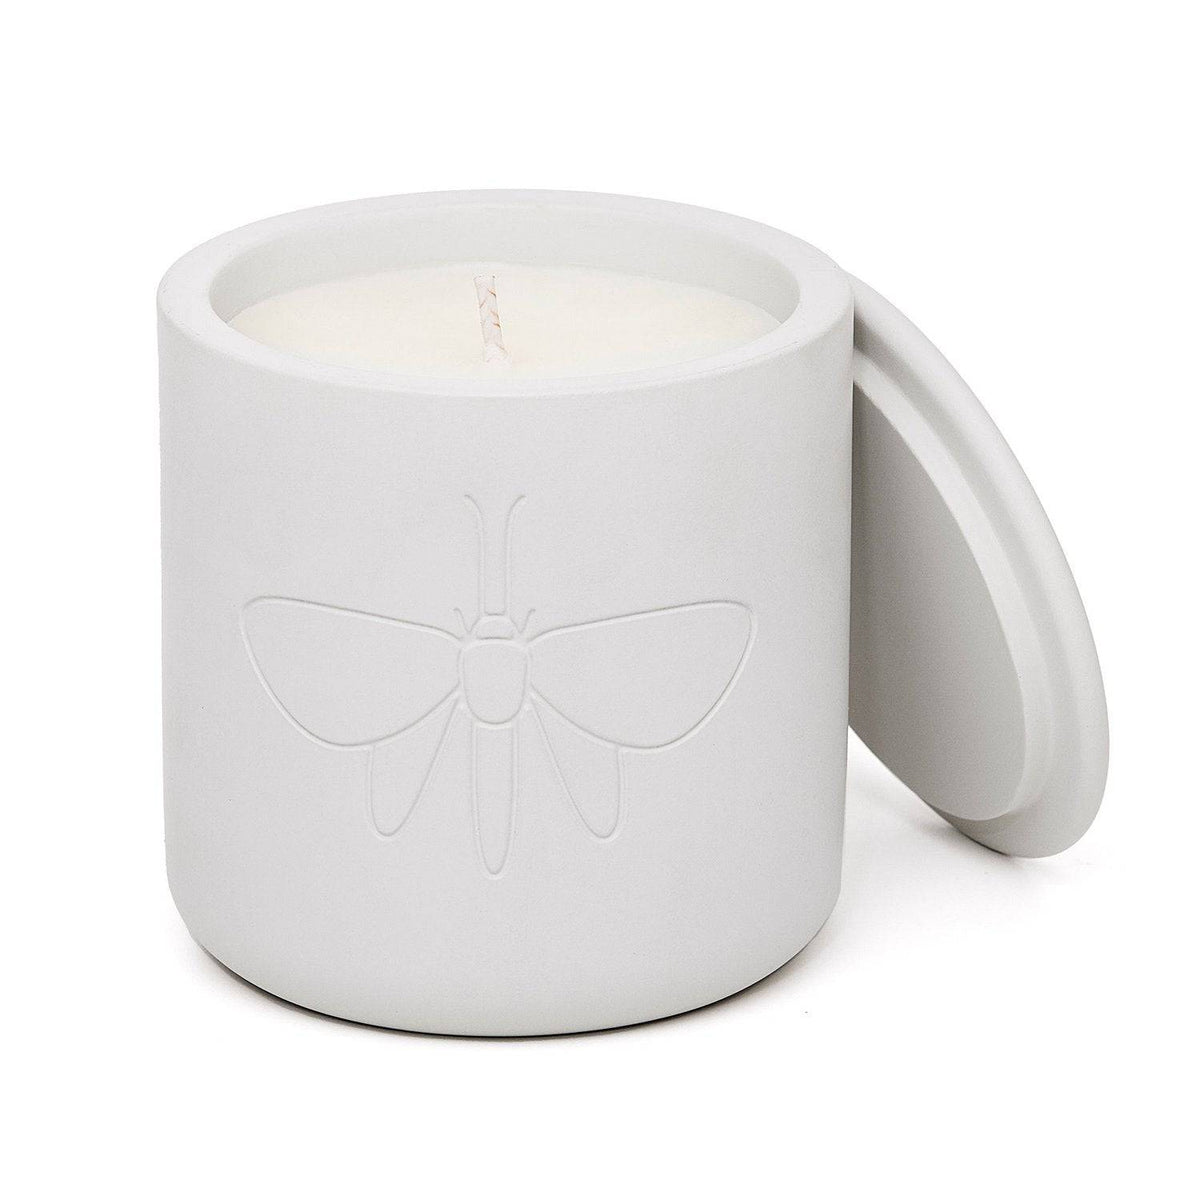 Cypress Drift Modern Citronella Candle - The Preppy Bunny